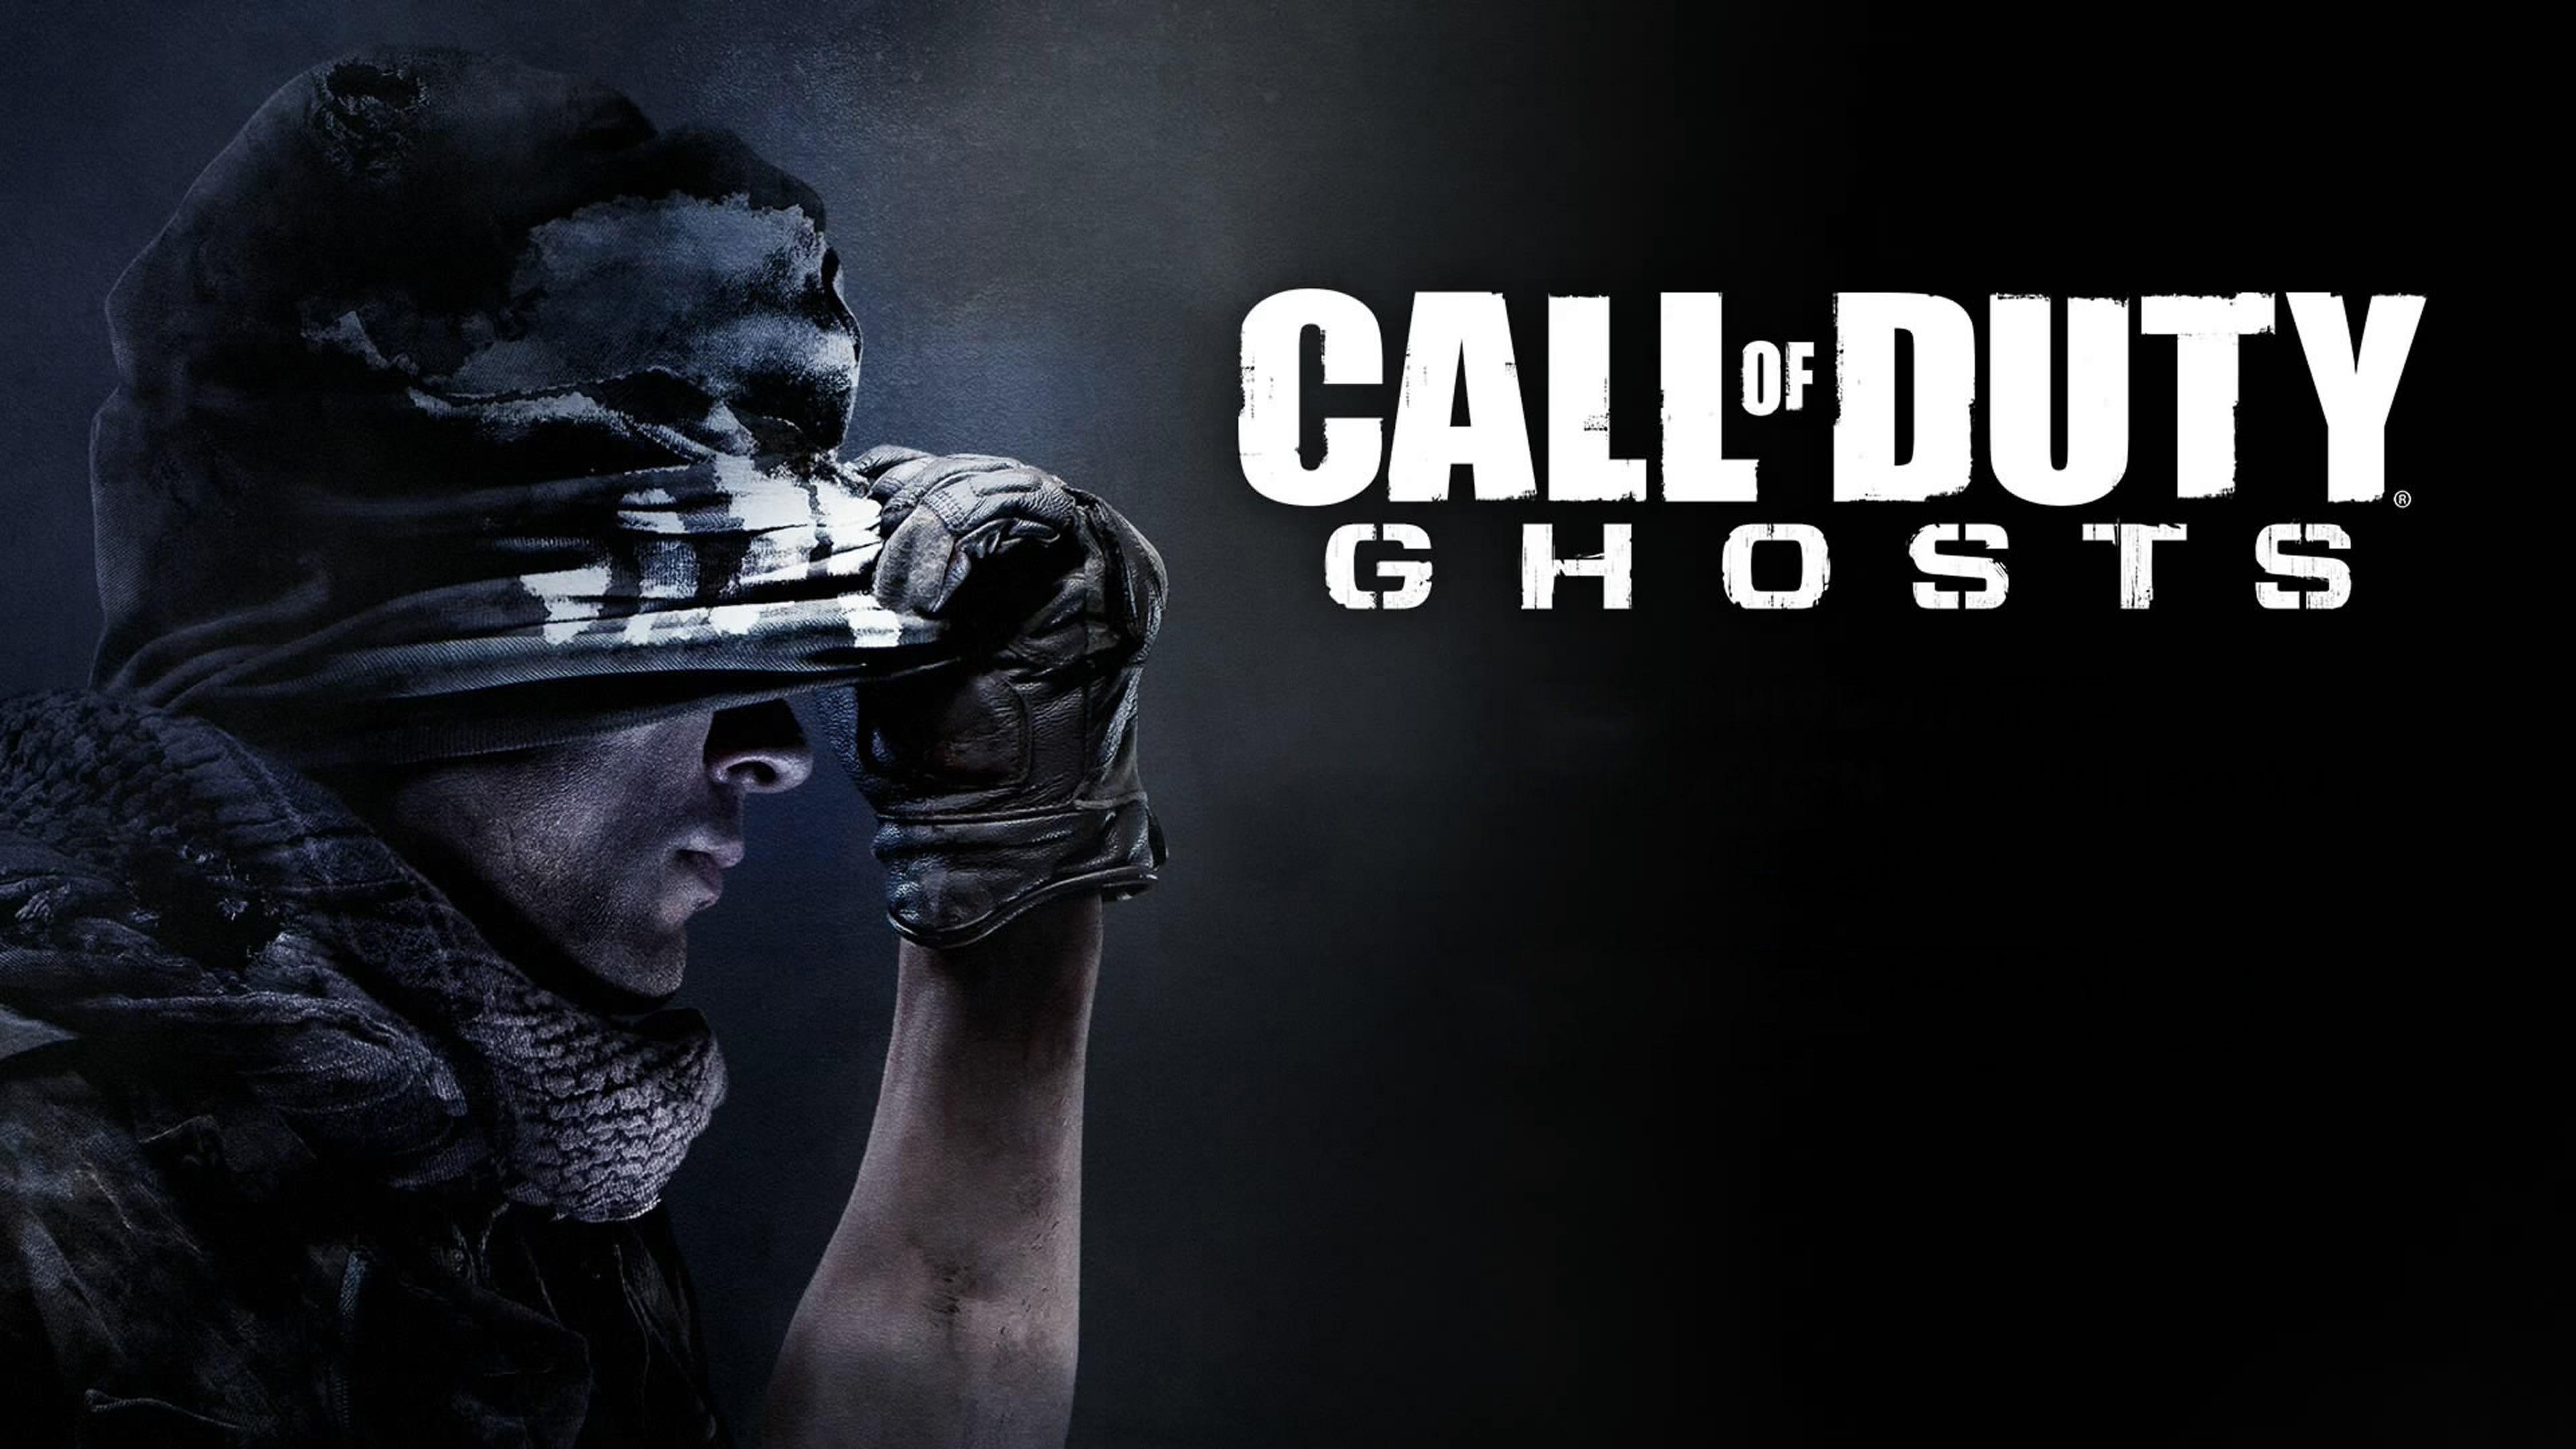 Call of Duty Ghost 4k wallpaper. Call of duty, Call